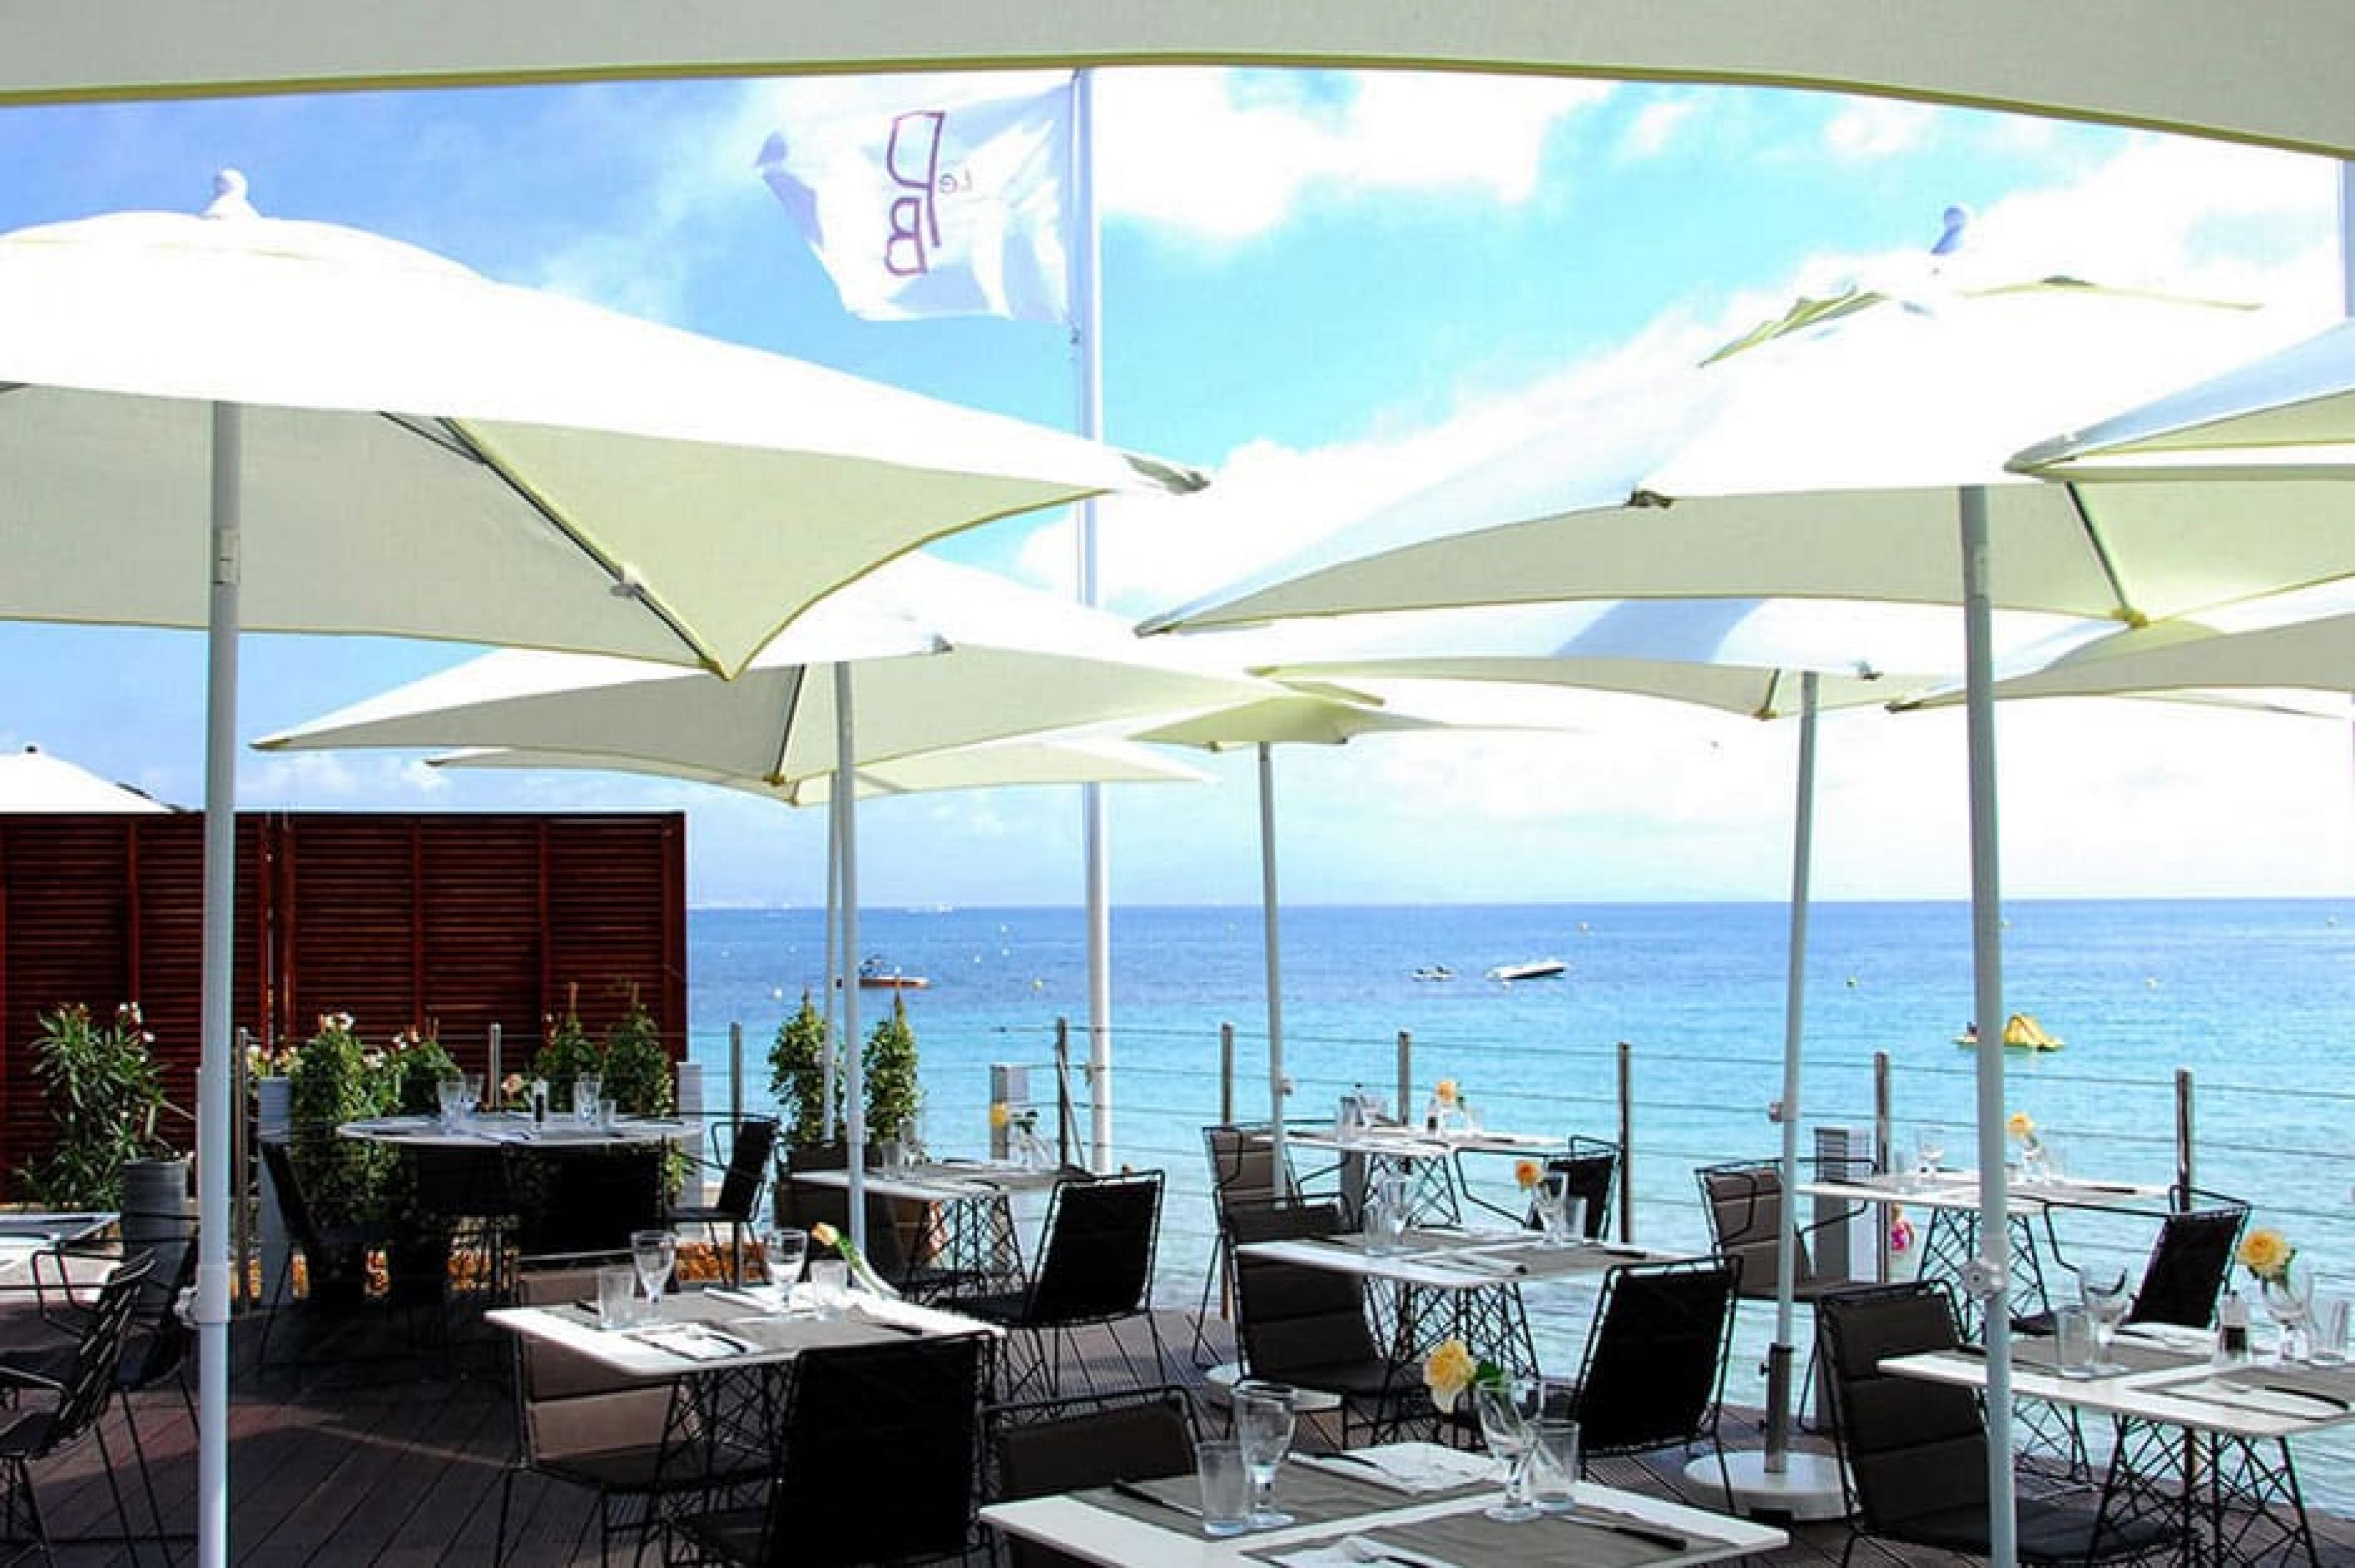 Restaurant at Le Pavillon, French Riviera, France